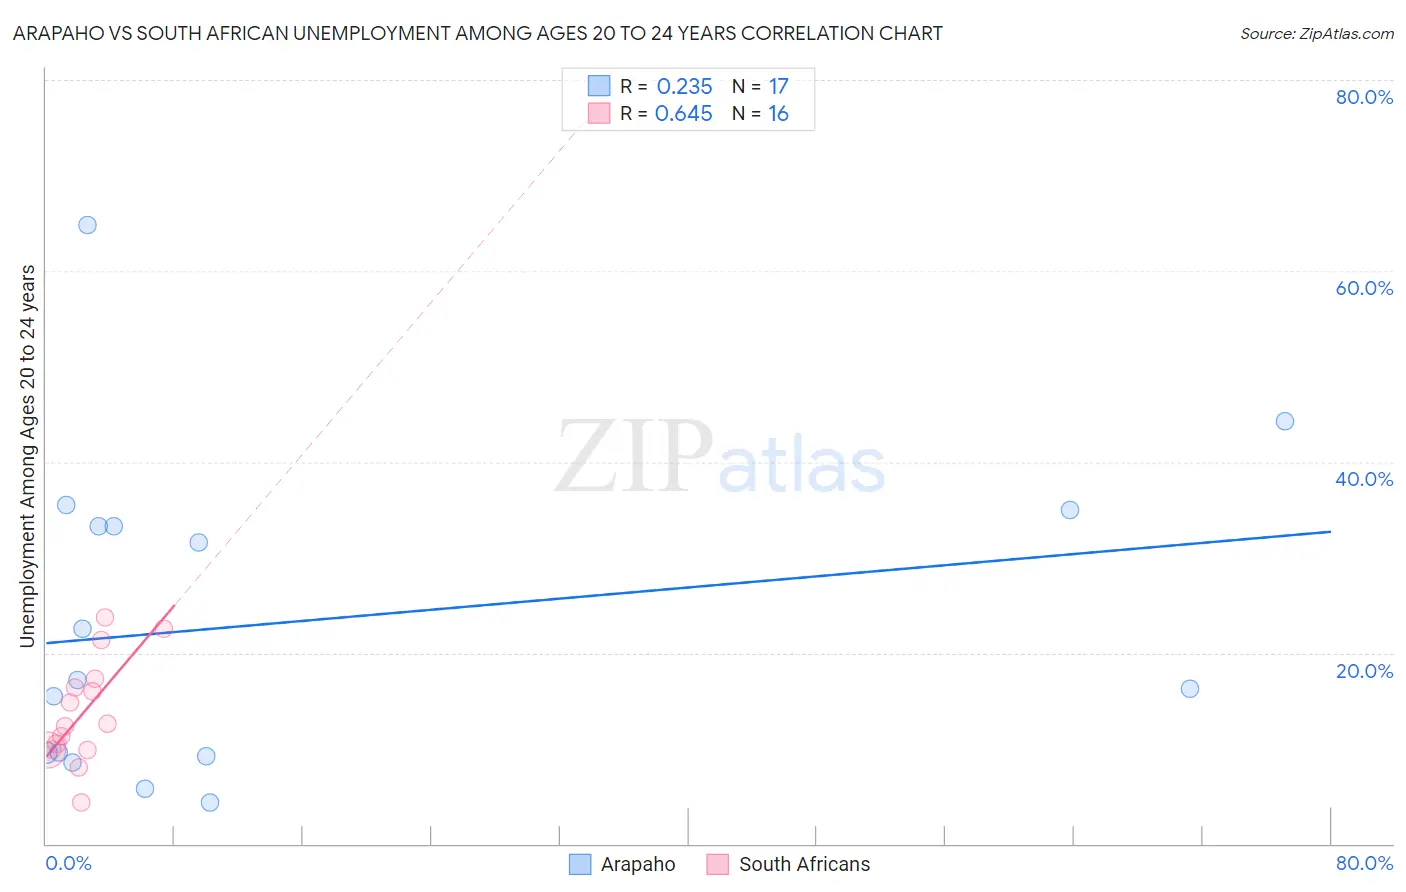 Arapaho vs South African Unemployment Among Ages 20 to 24 years